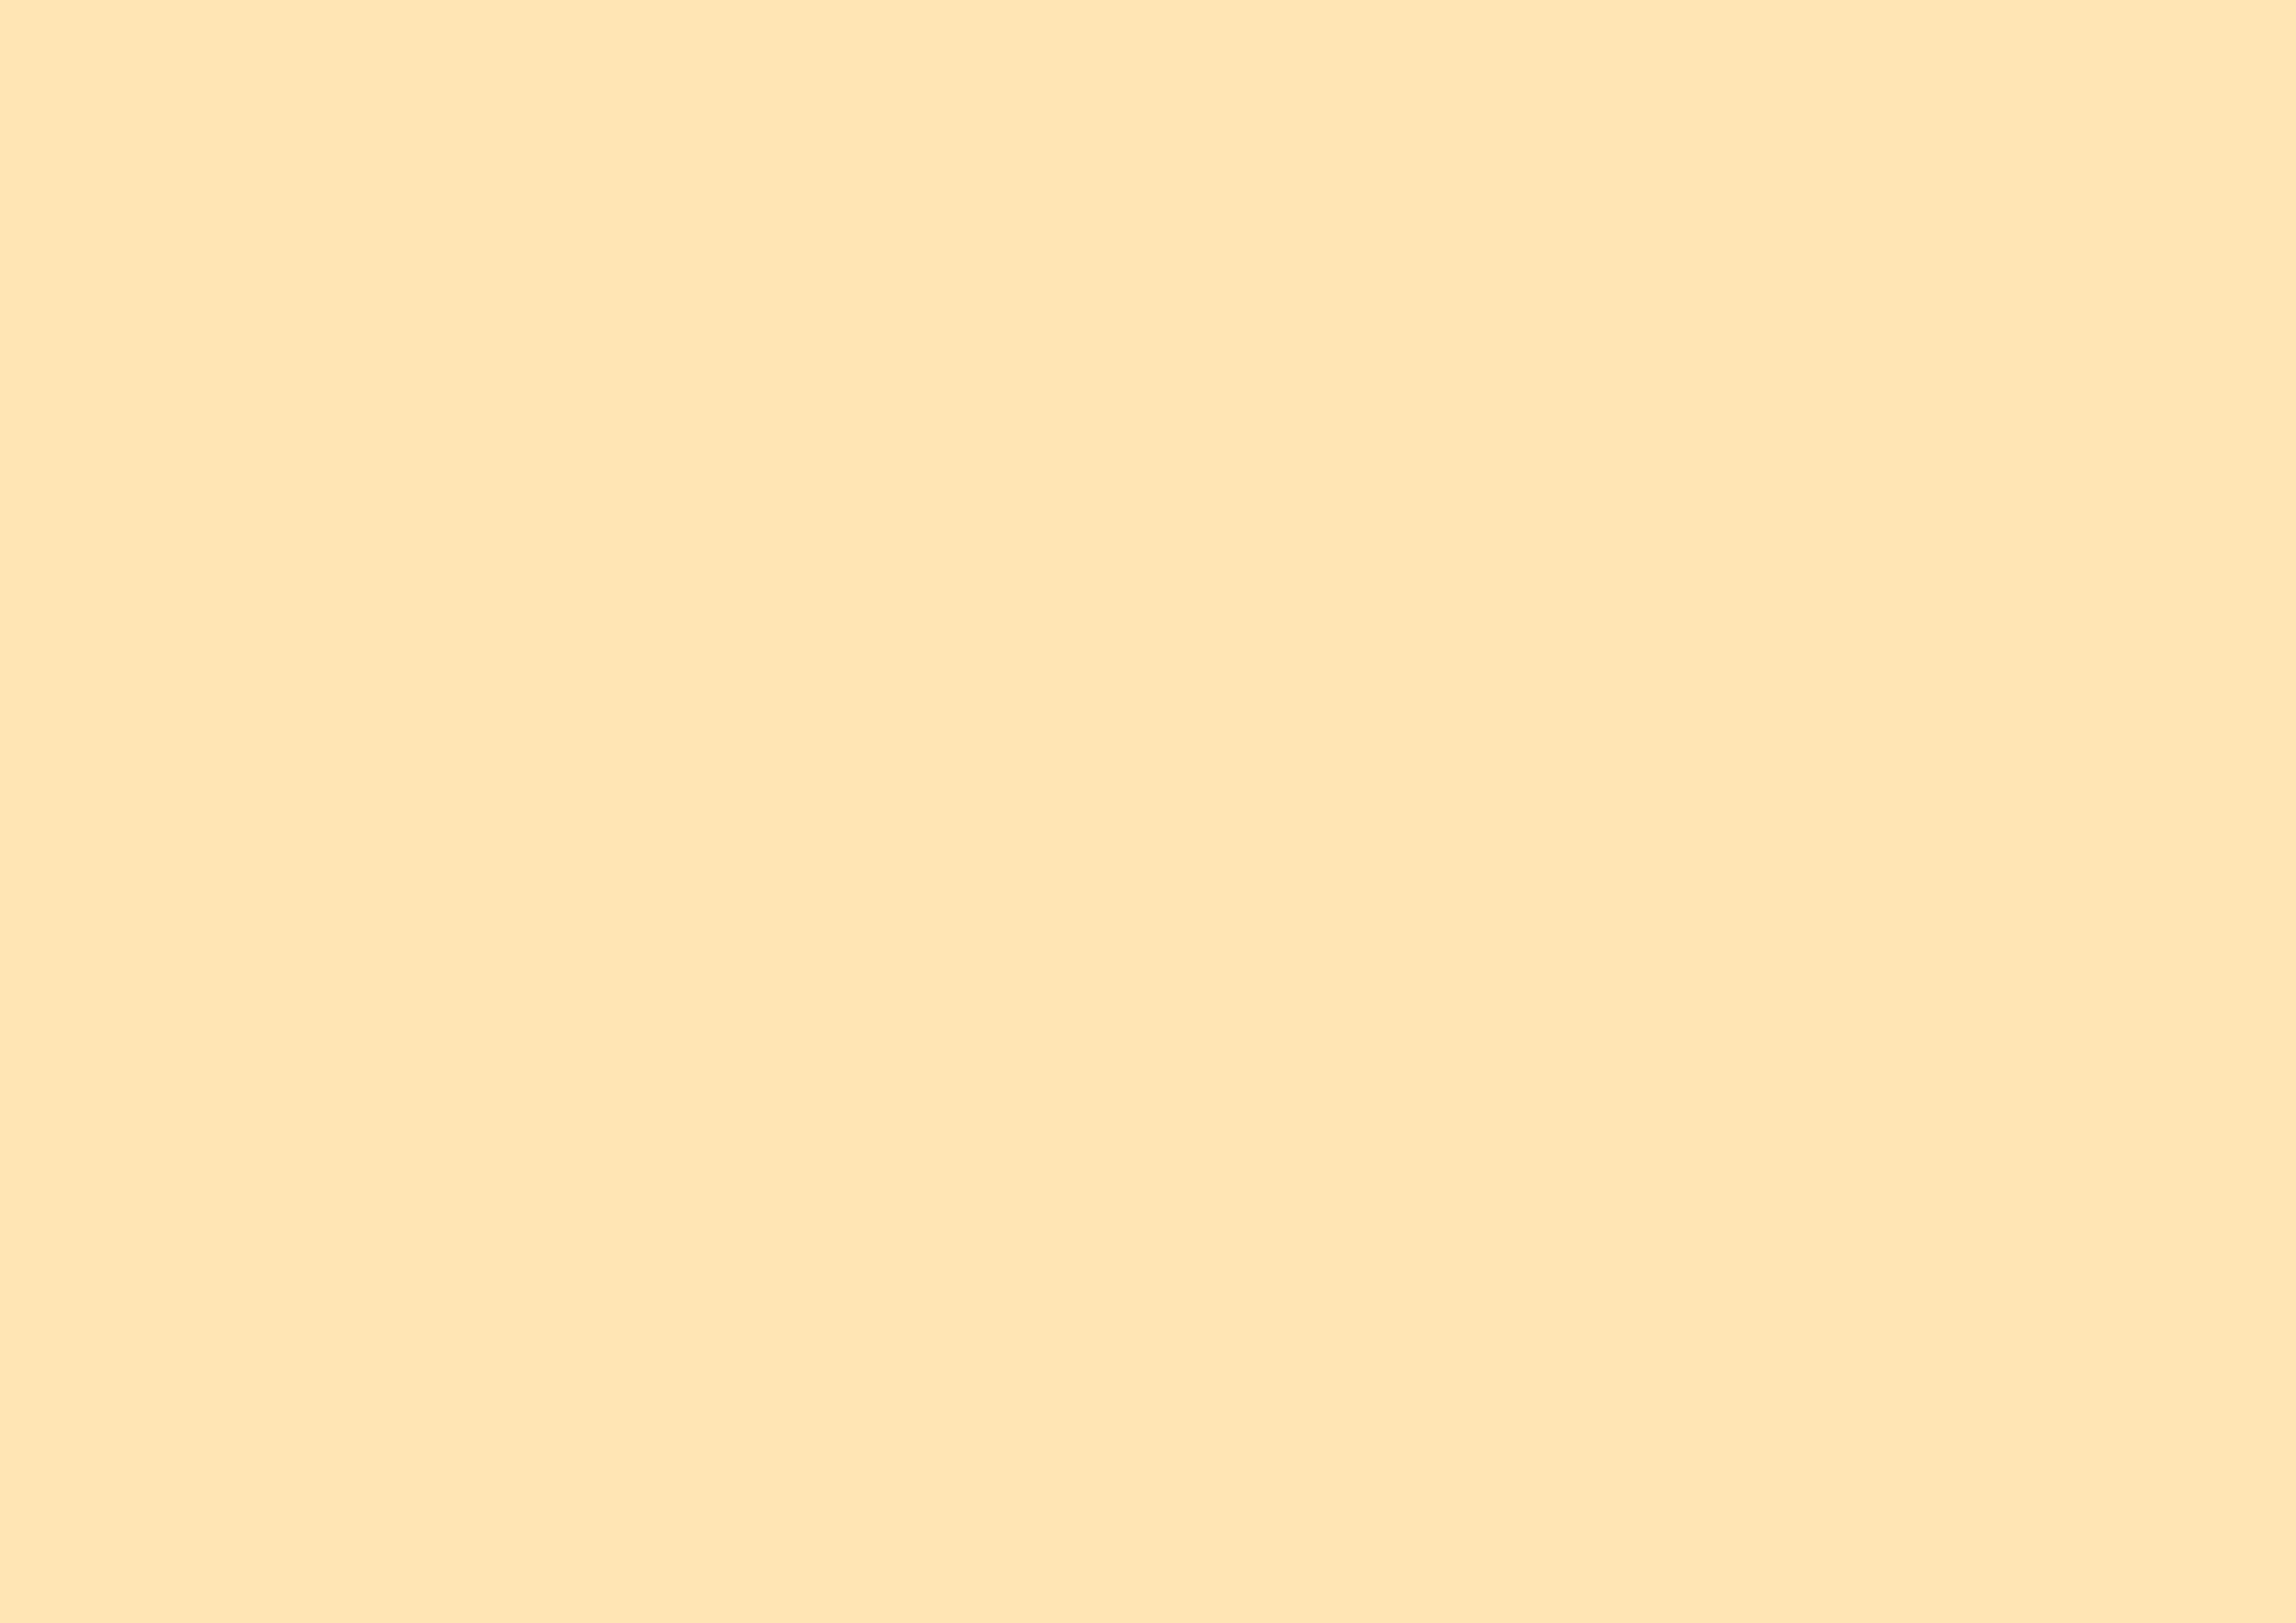 3508x2480 Peach Solid Color Background